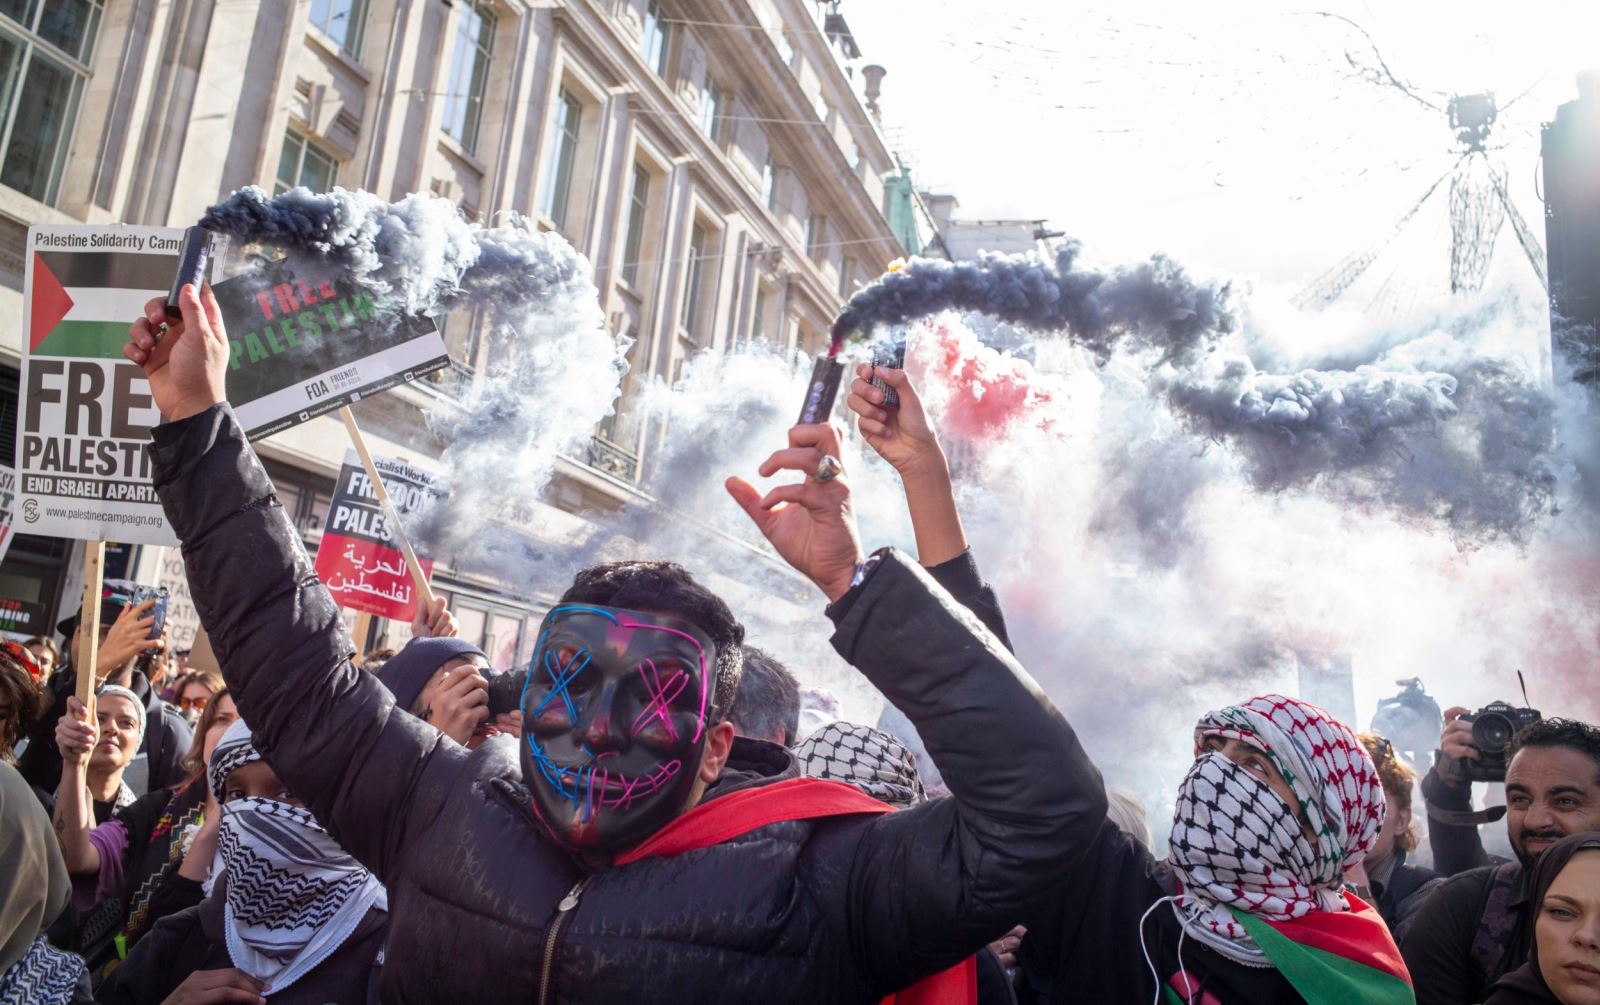 Britain will ban face coverings and fireworks at protests